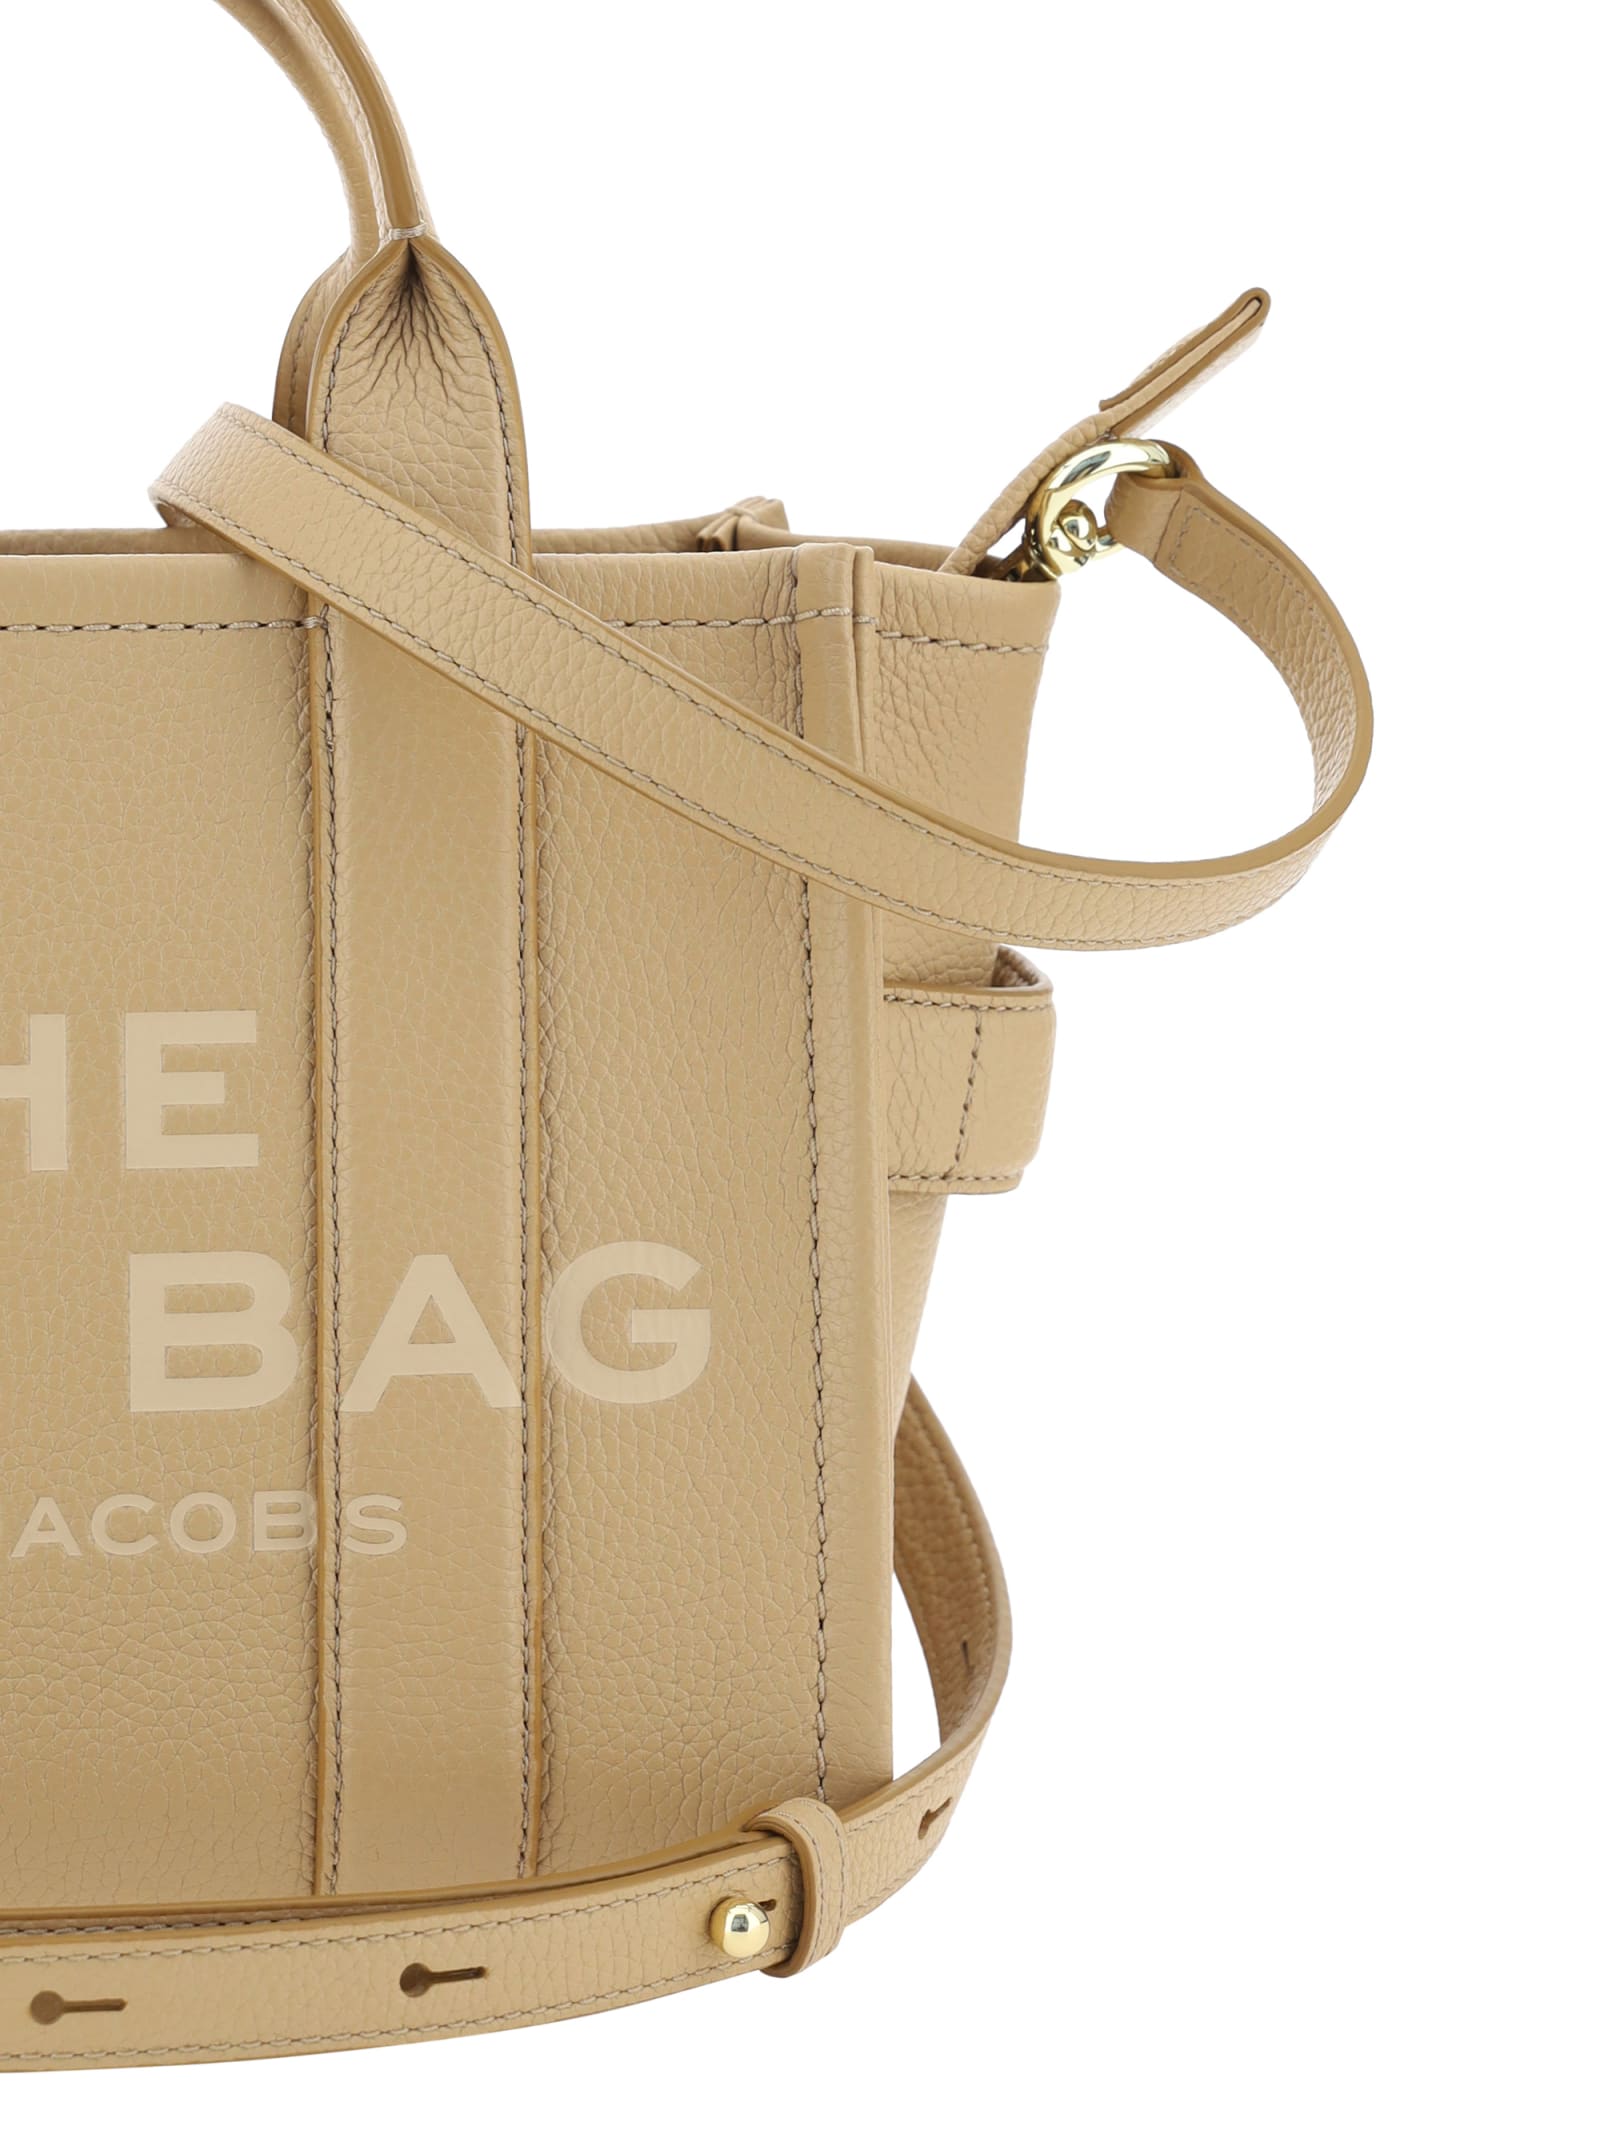 Shop Marc Jacobs The Small Tote Handbag In Camel